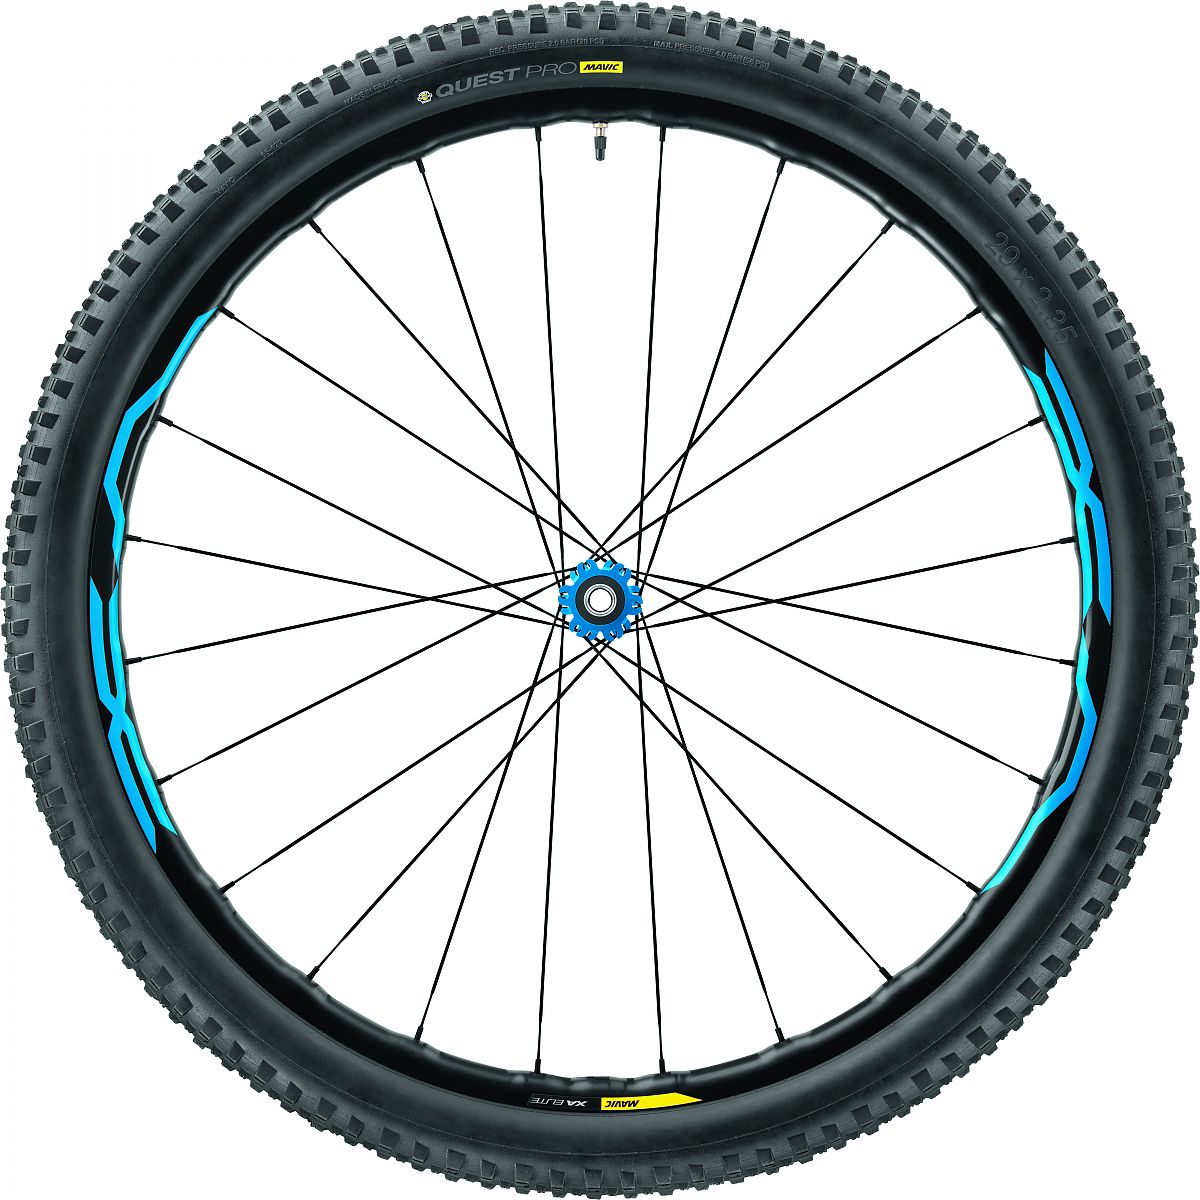 Mavic announces its first carbon mountain bike wheels | Bicycle 